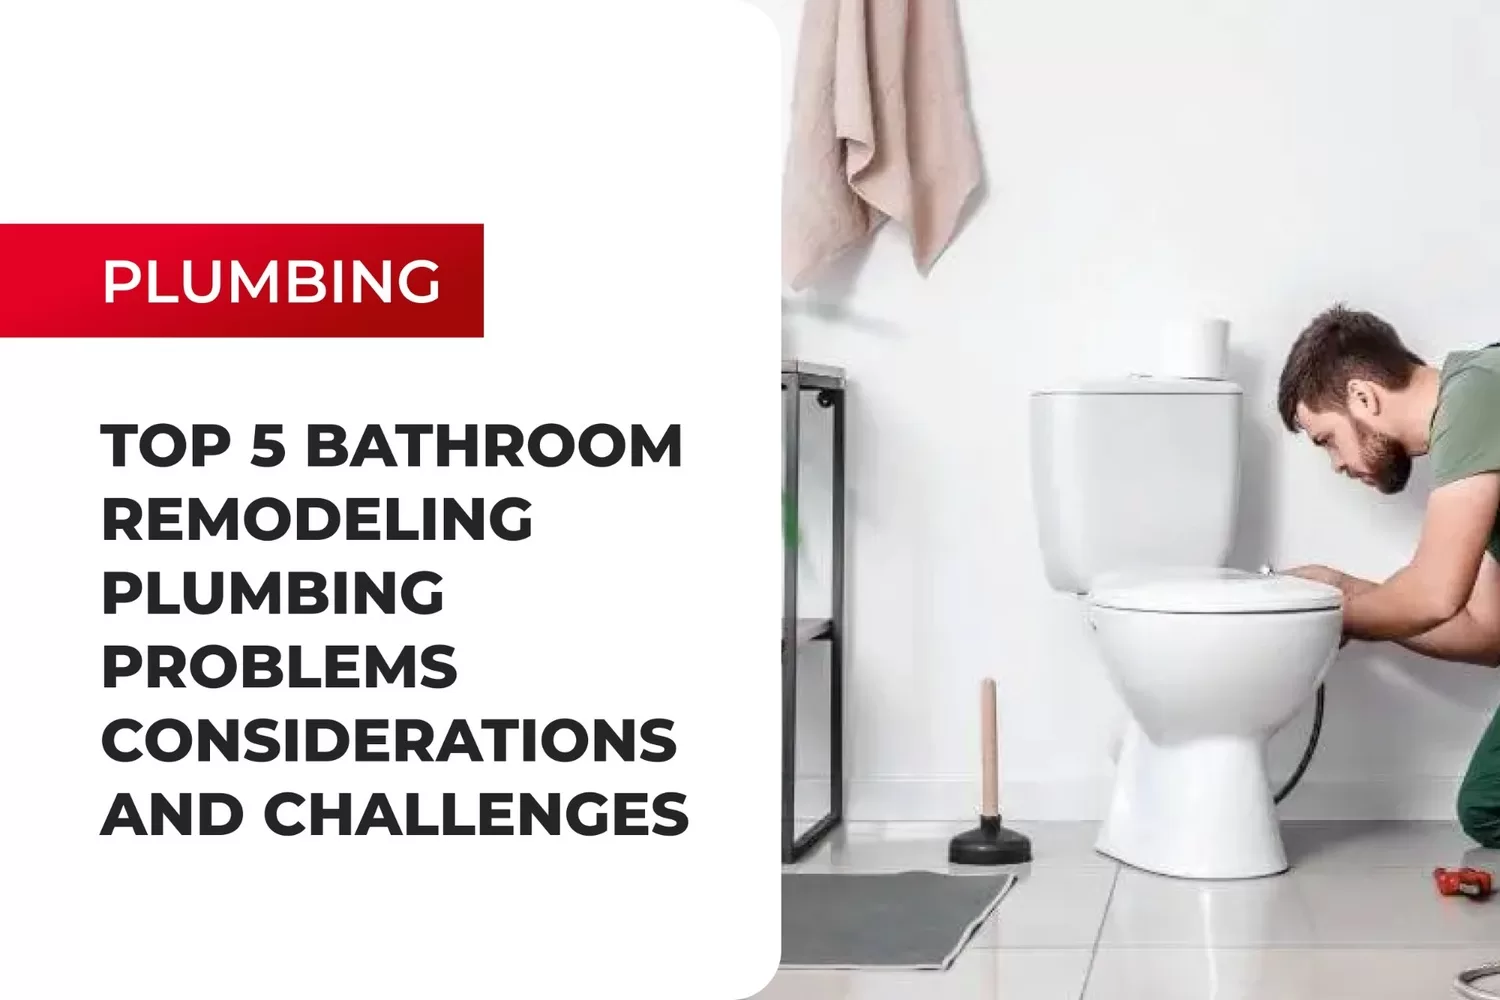 Top 5 Bathroom Remodeling Plumbing Problems, Considerations and Challenges